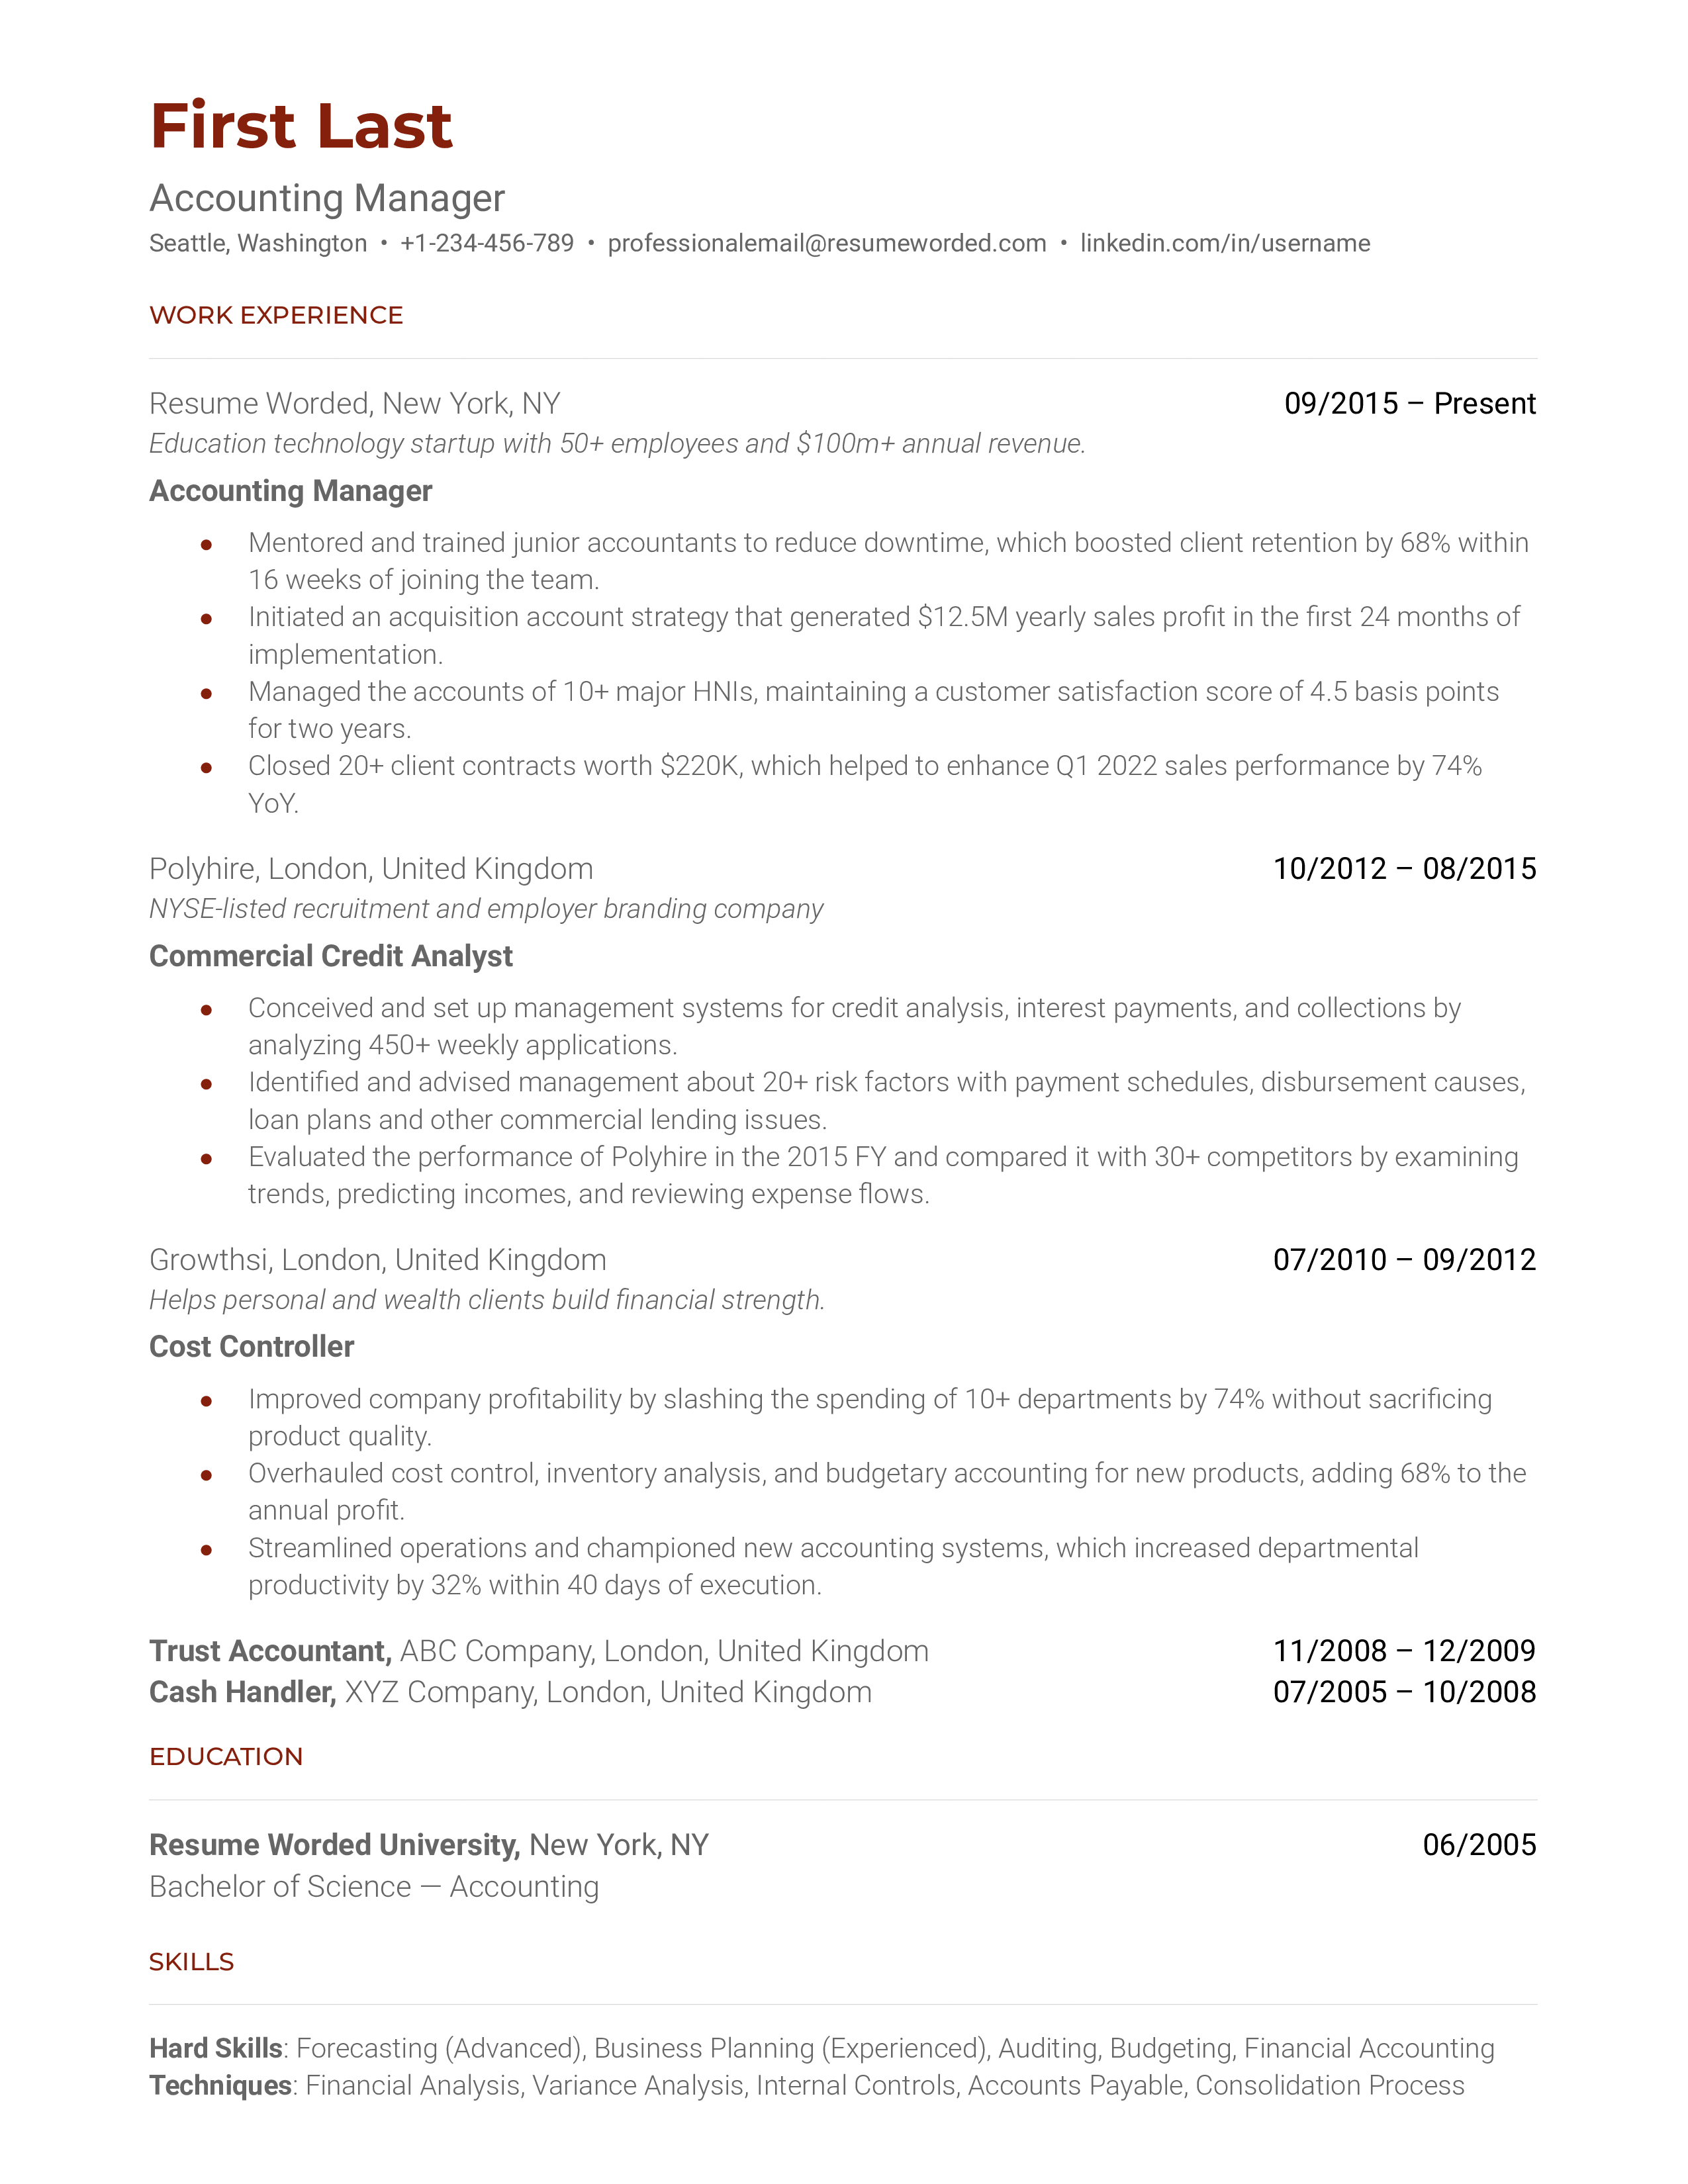 An accounting manager resume template prioritizing technical skills.